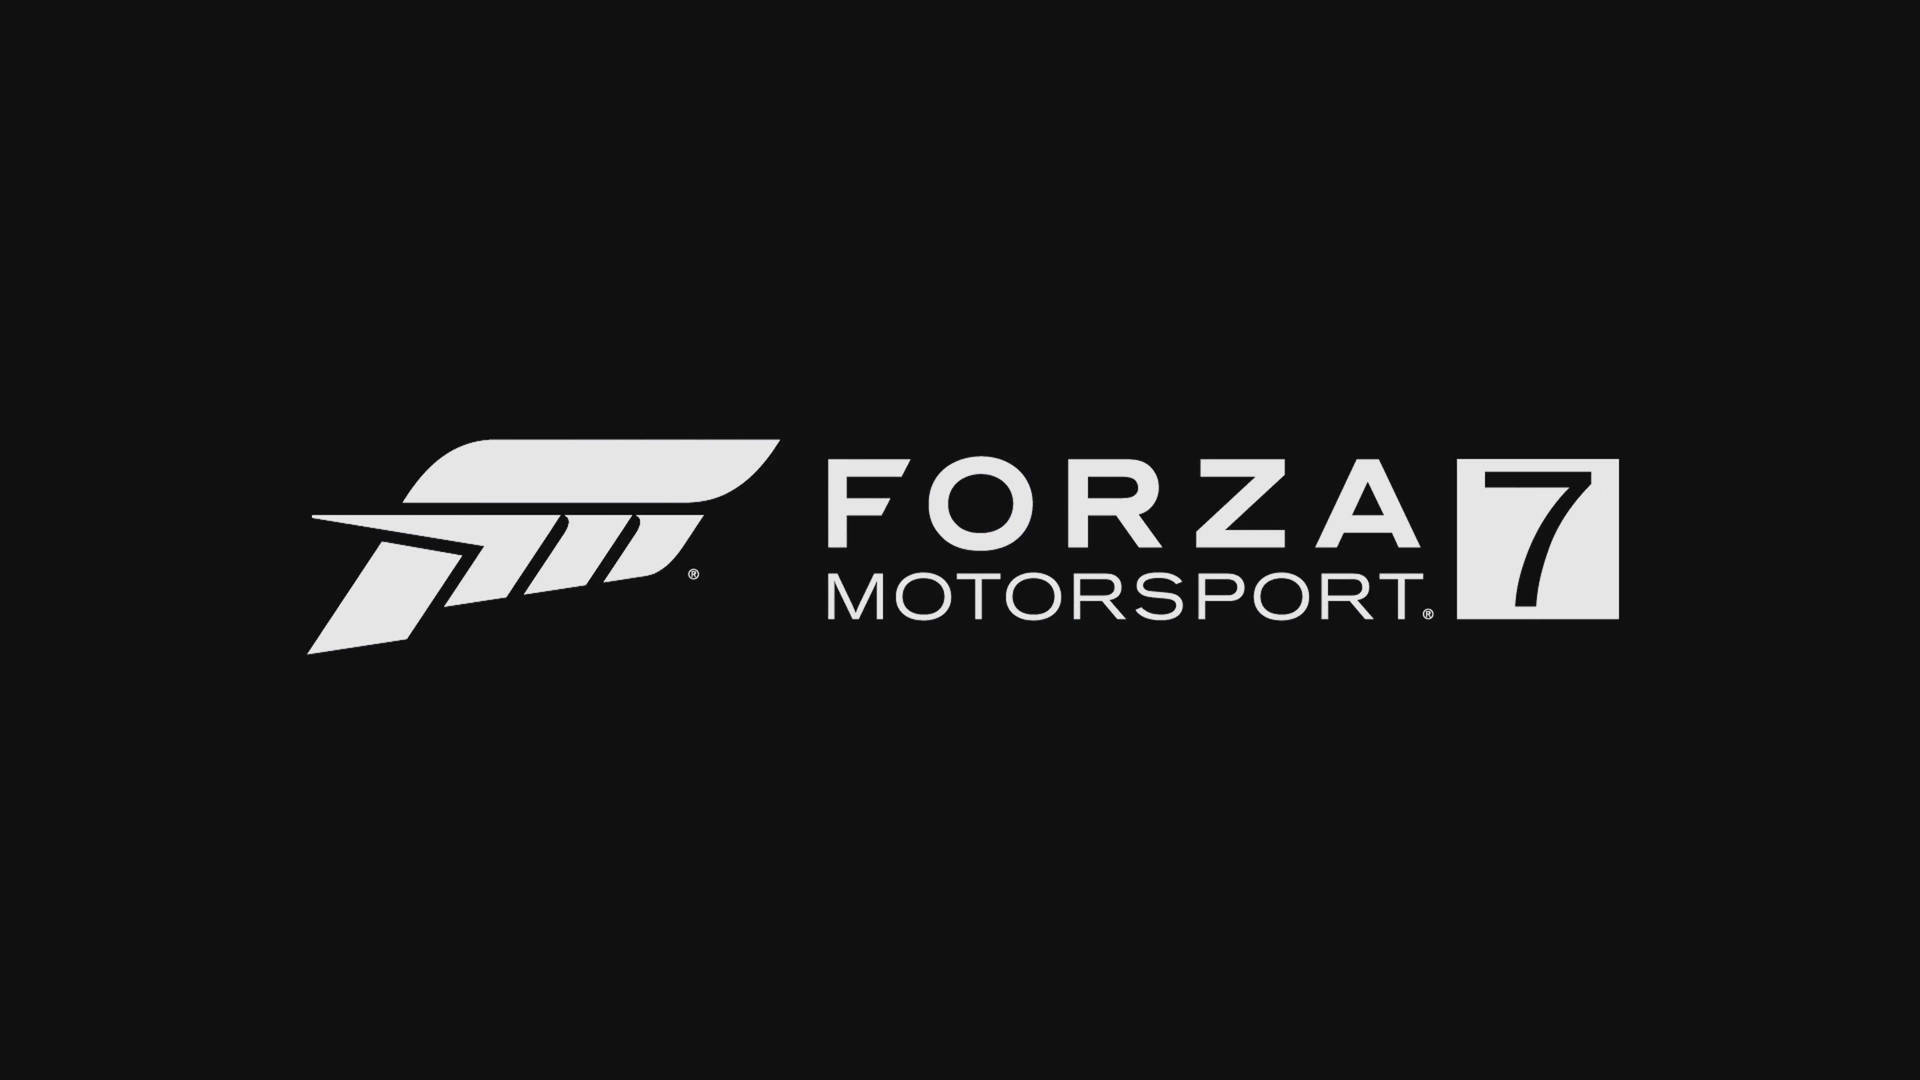 Forza Motorsport 7 Simple Logo Picture